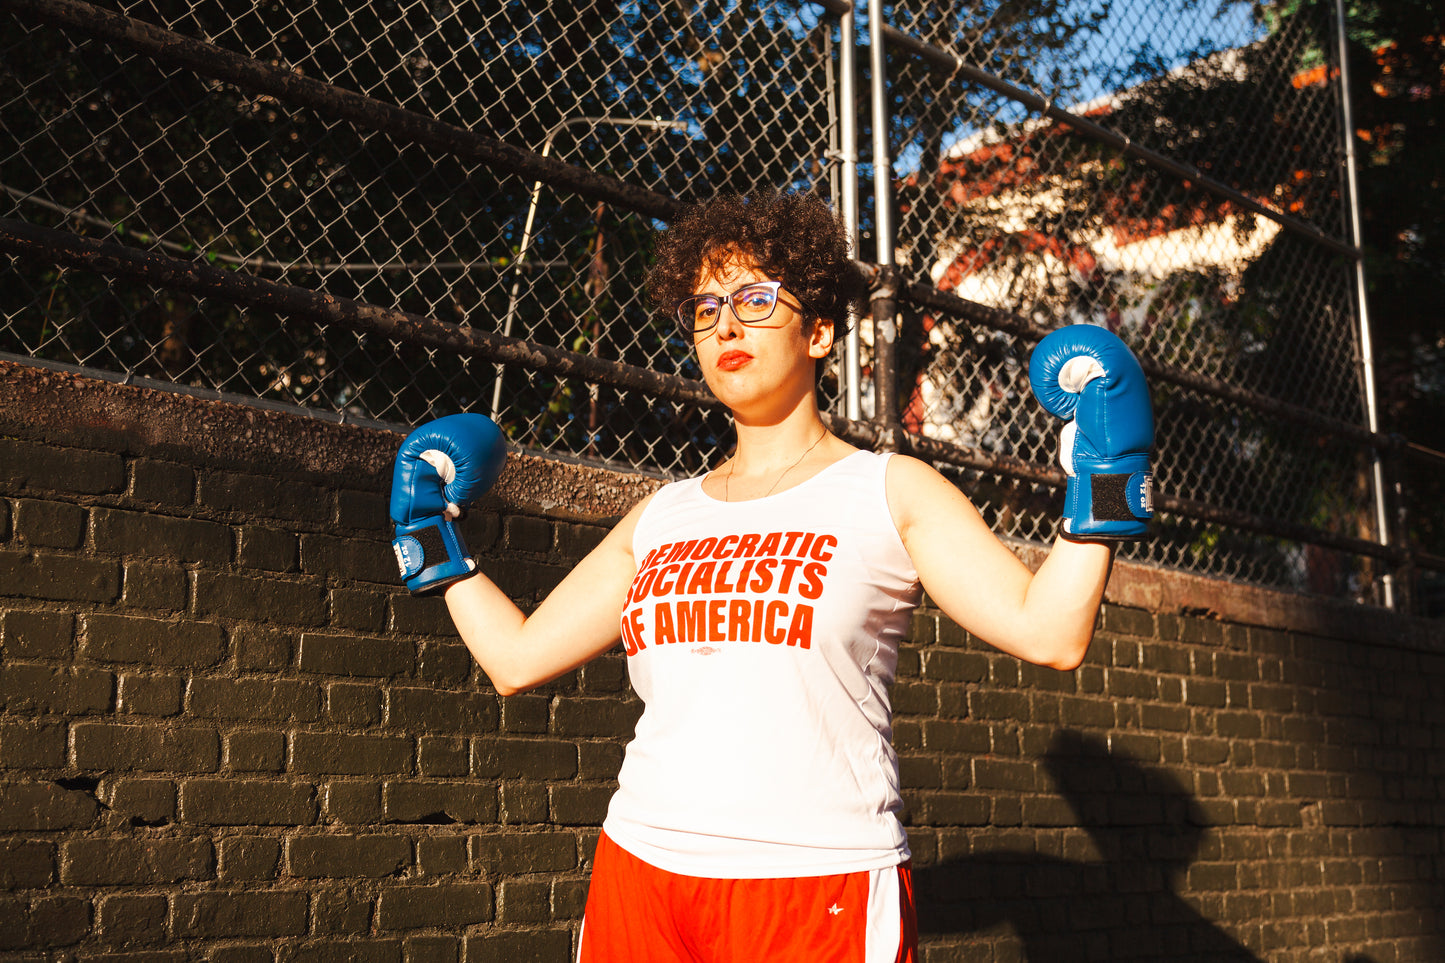 Socialist in track tank top poses with boxing gloves on a public athletic court.